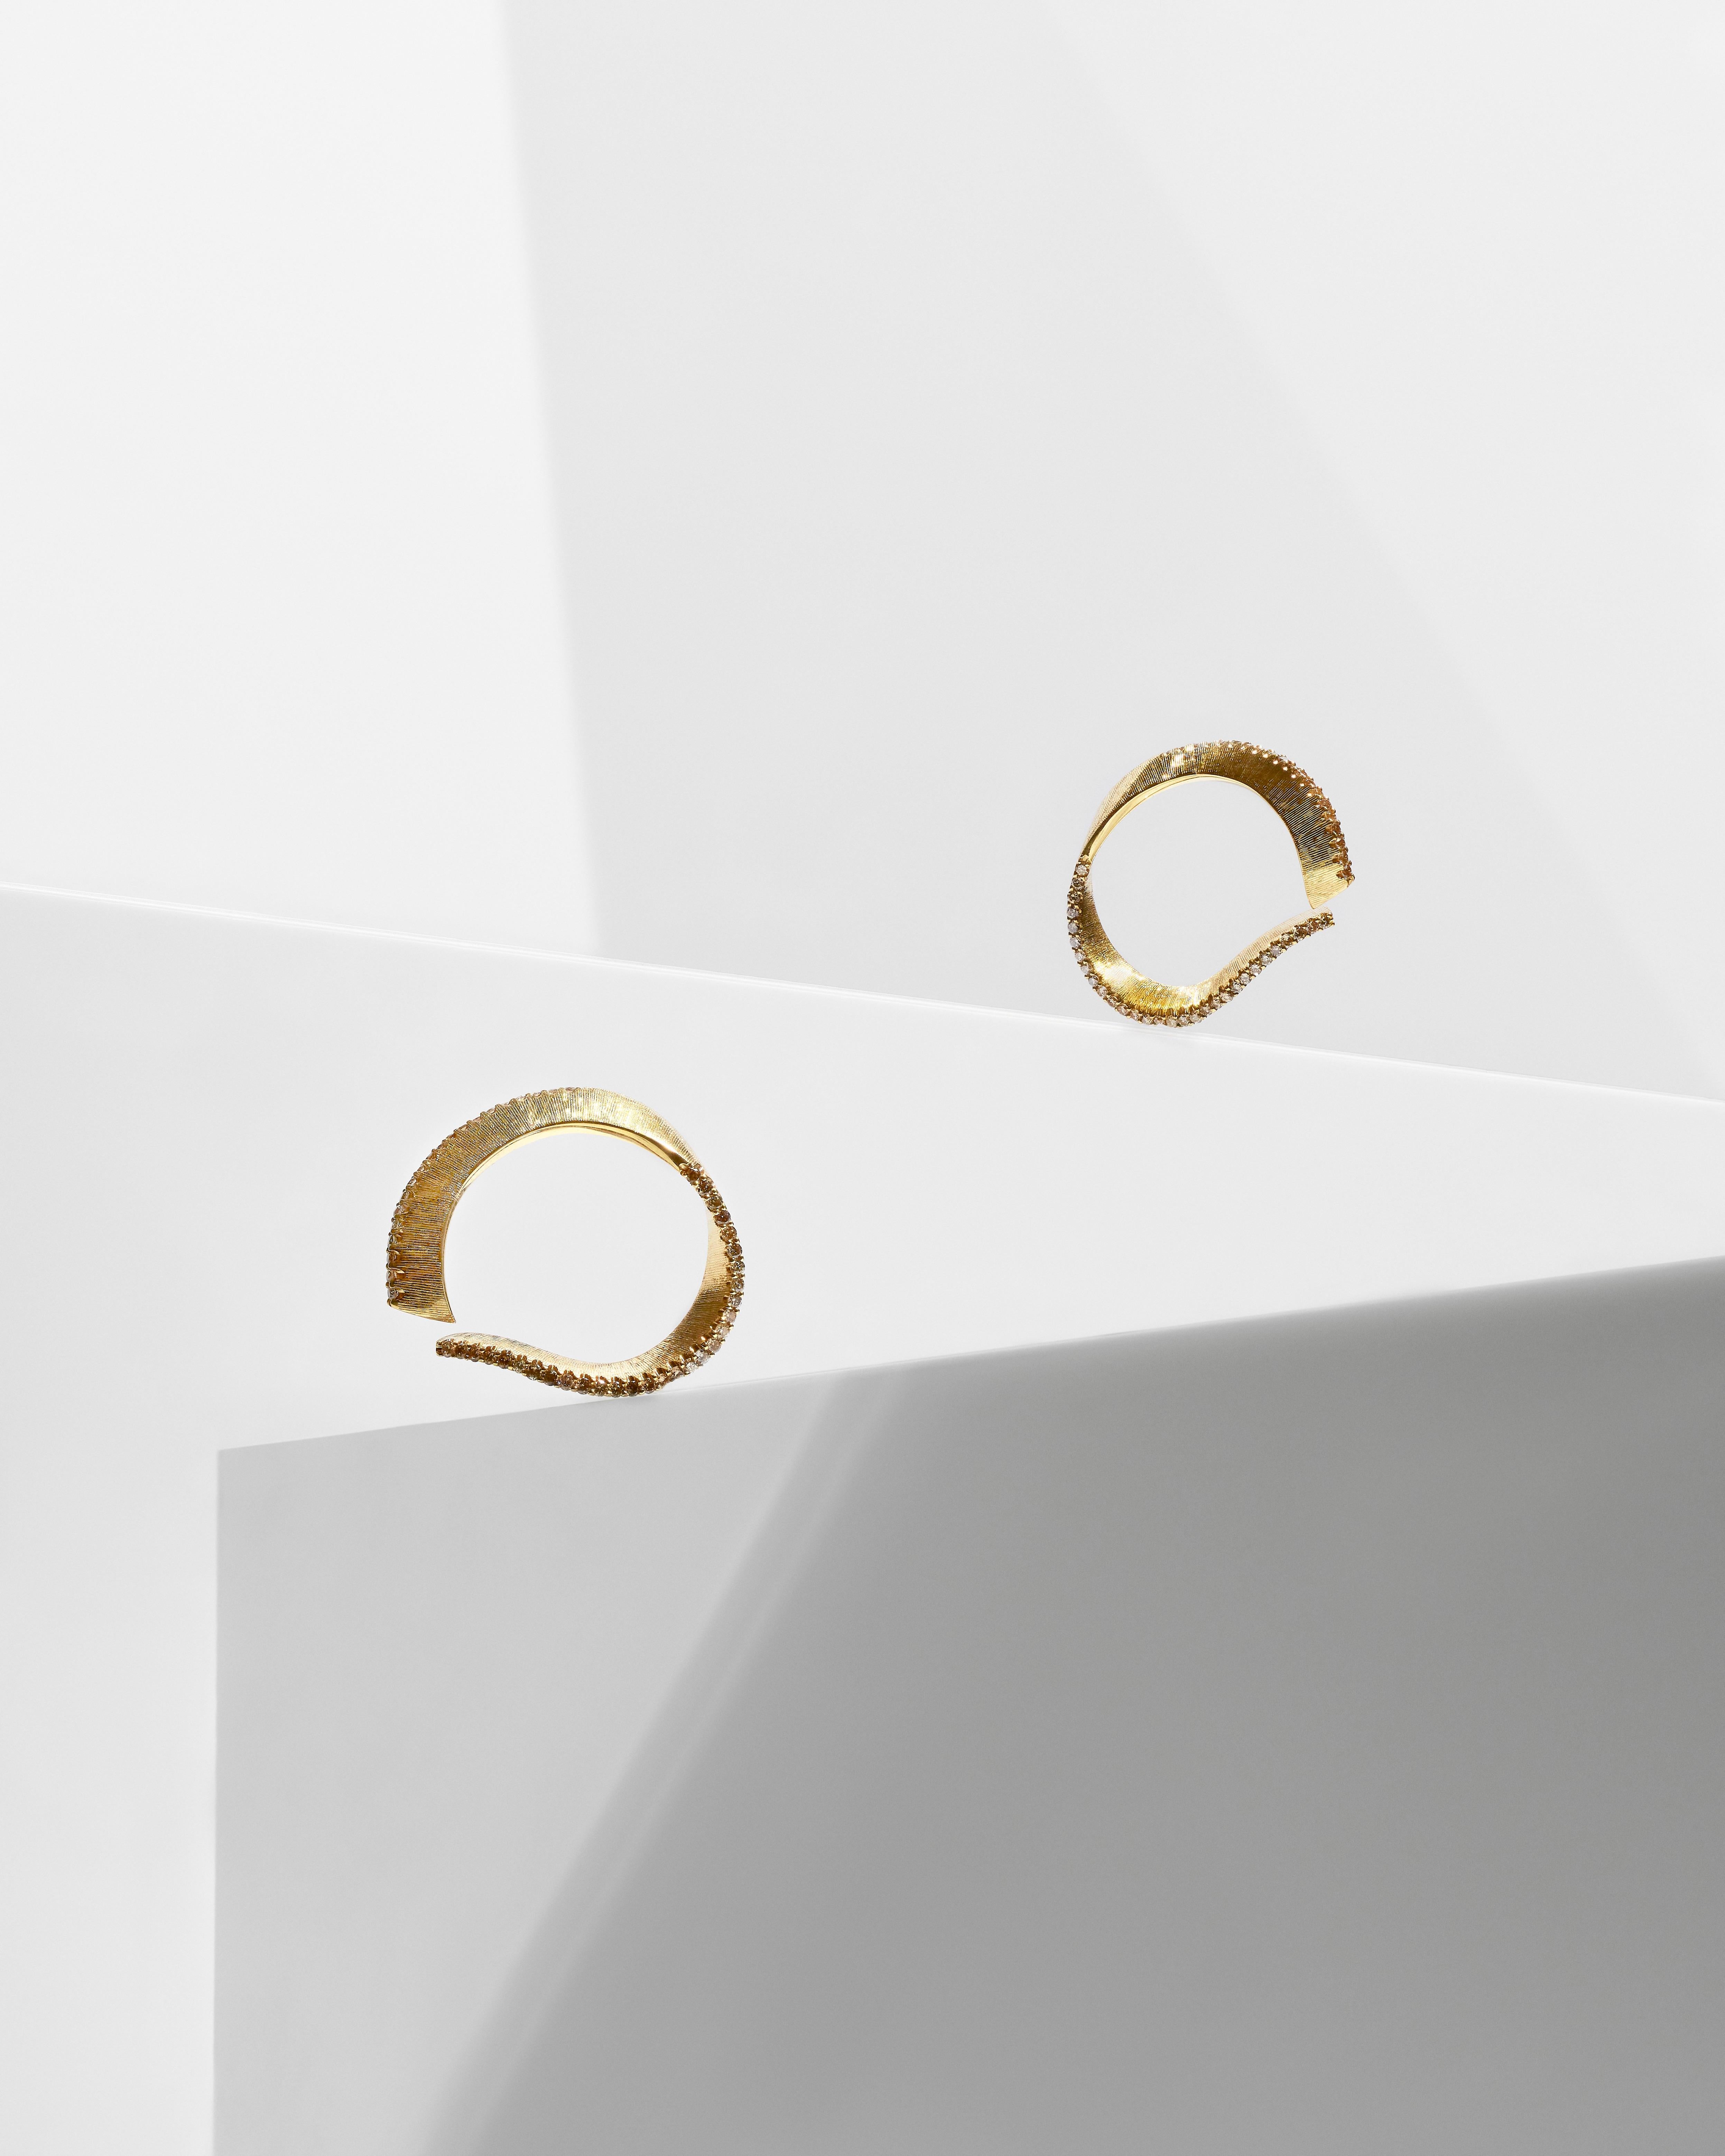 Liv Luttrell 
Diamond Edge Twist Hoop Earrings 2020
18-karat yellow gold 


Details
18-karat yellow gold 
Natural warm-tone diamonds
Silk engraving
Made in London 


Customisation 

As this design is handmade to your order, Liv is able to customise